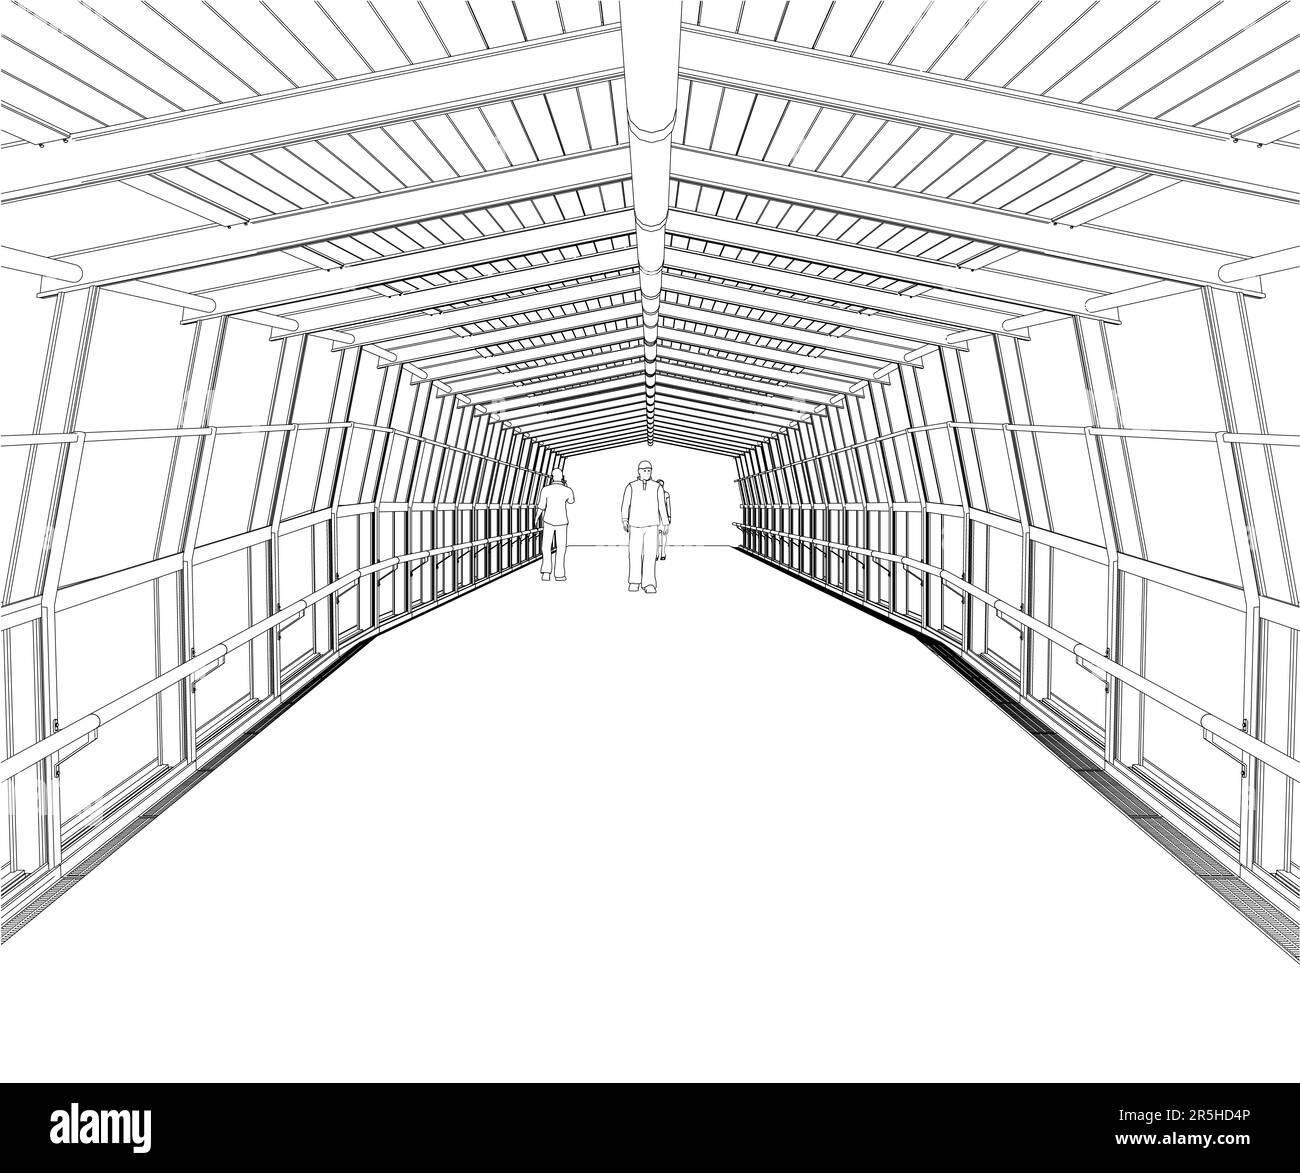 Outline of a footbridge with a roof and people walking from black lines isolated on a white background. Vector illustration. Stock Vector